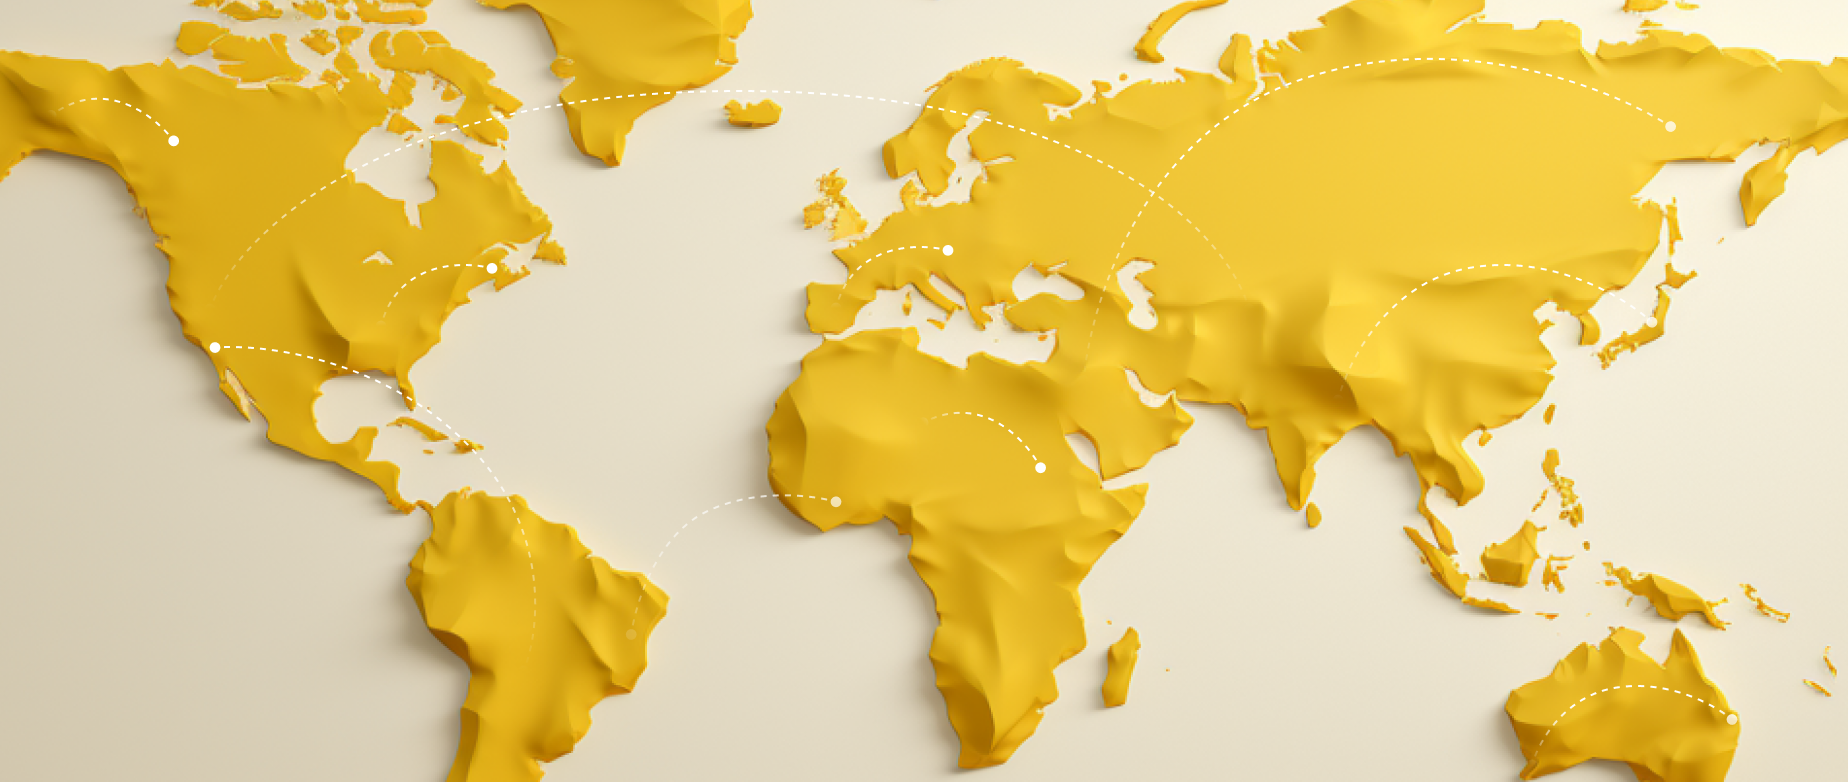 A yellow map of the continents with white dotted lines from each on a light peach background.